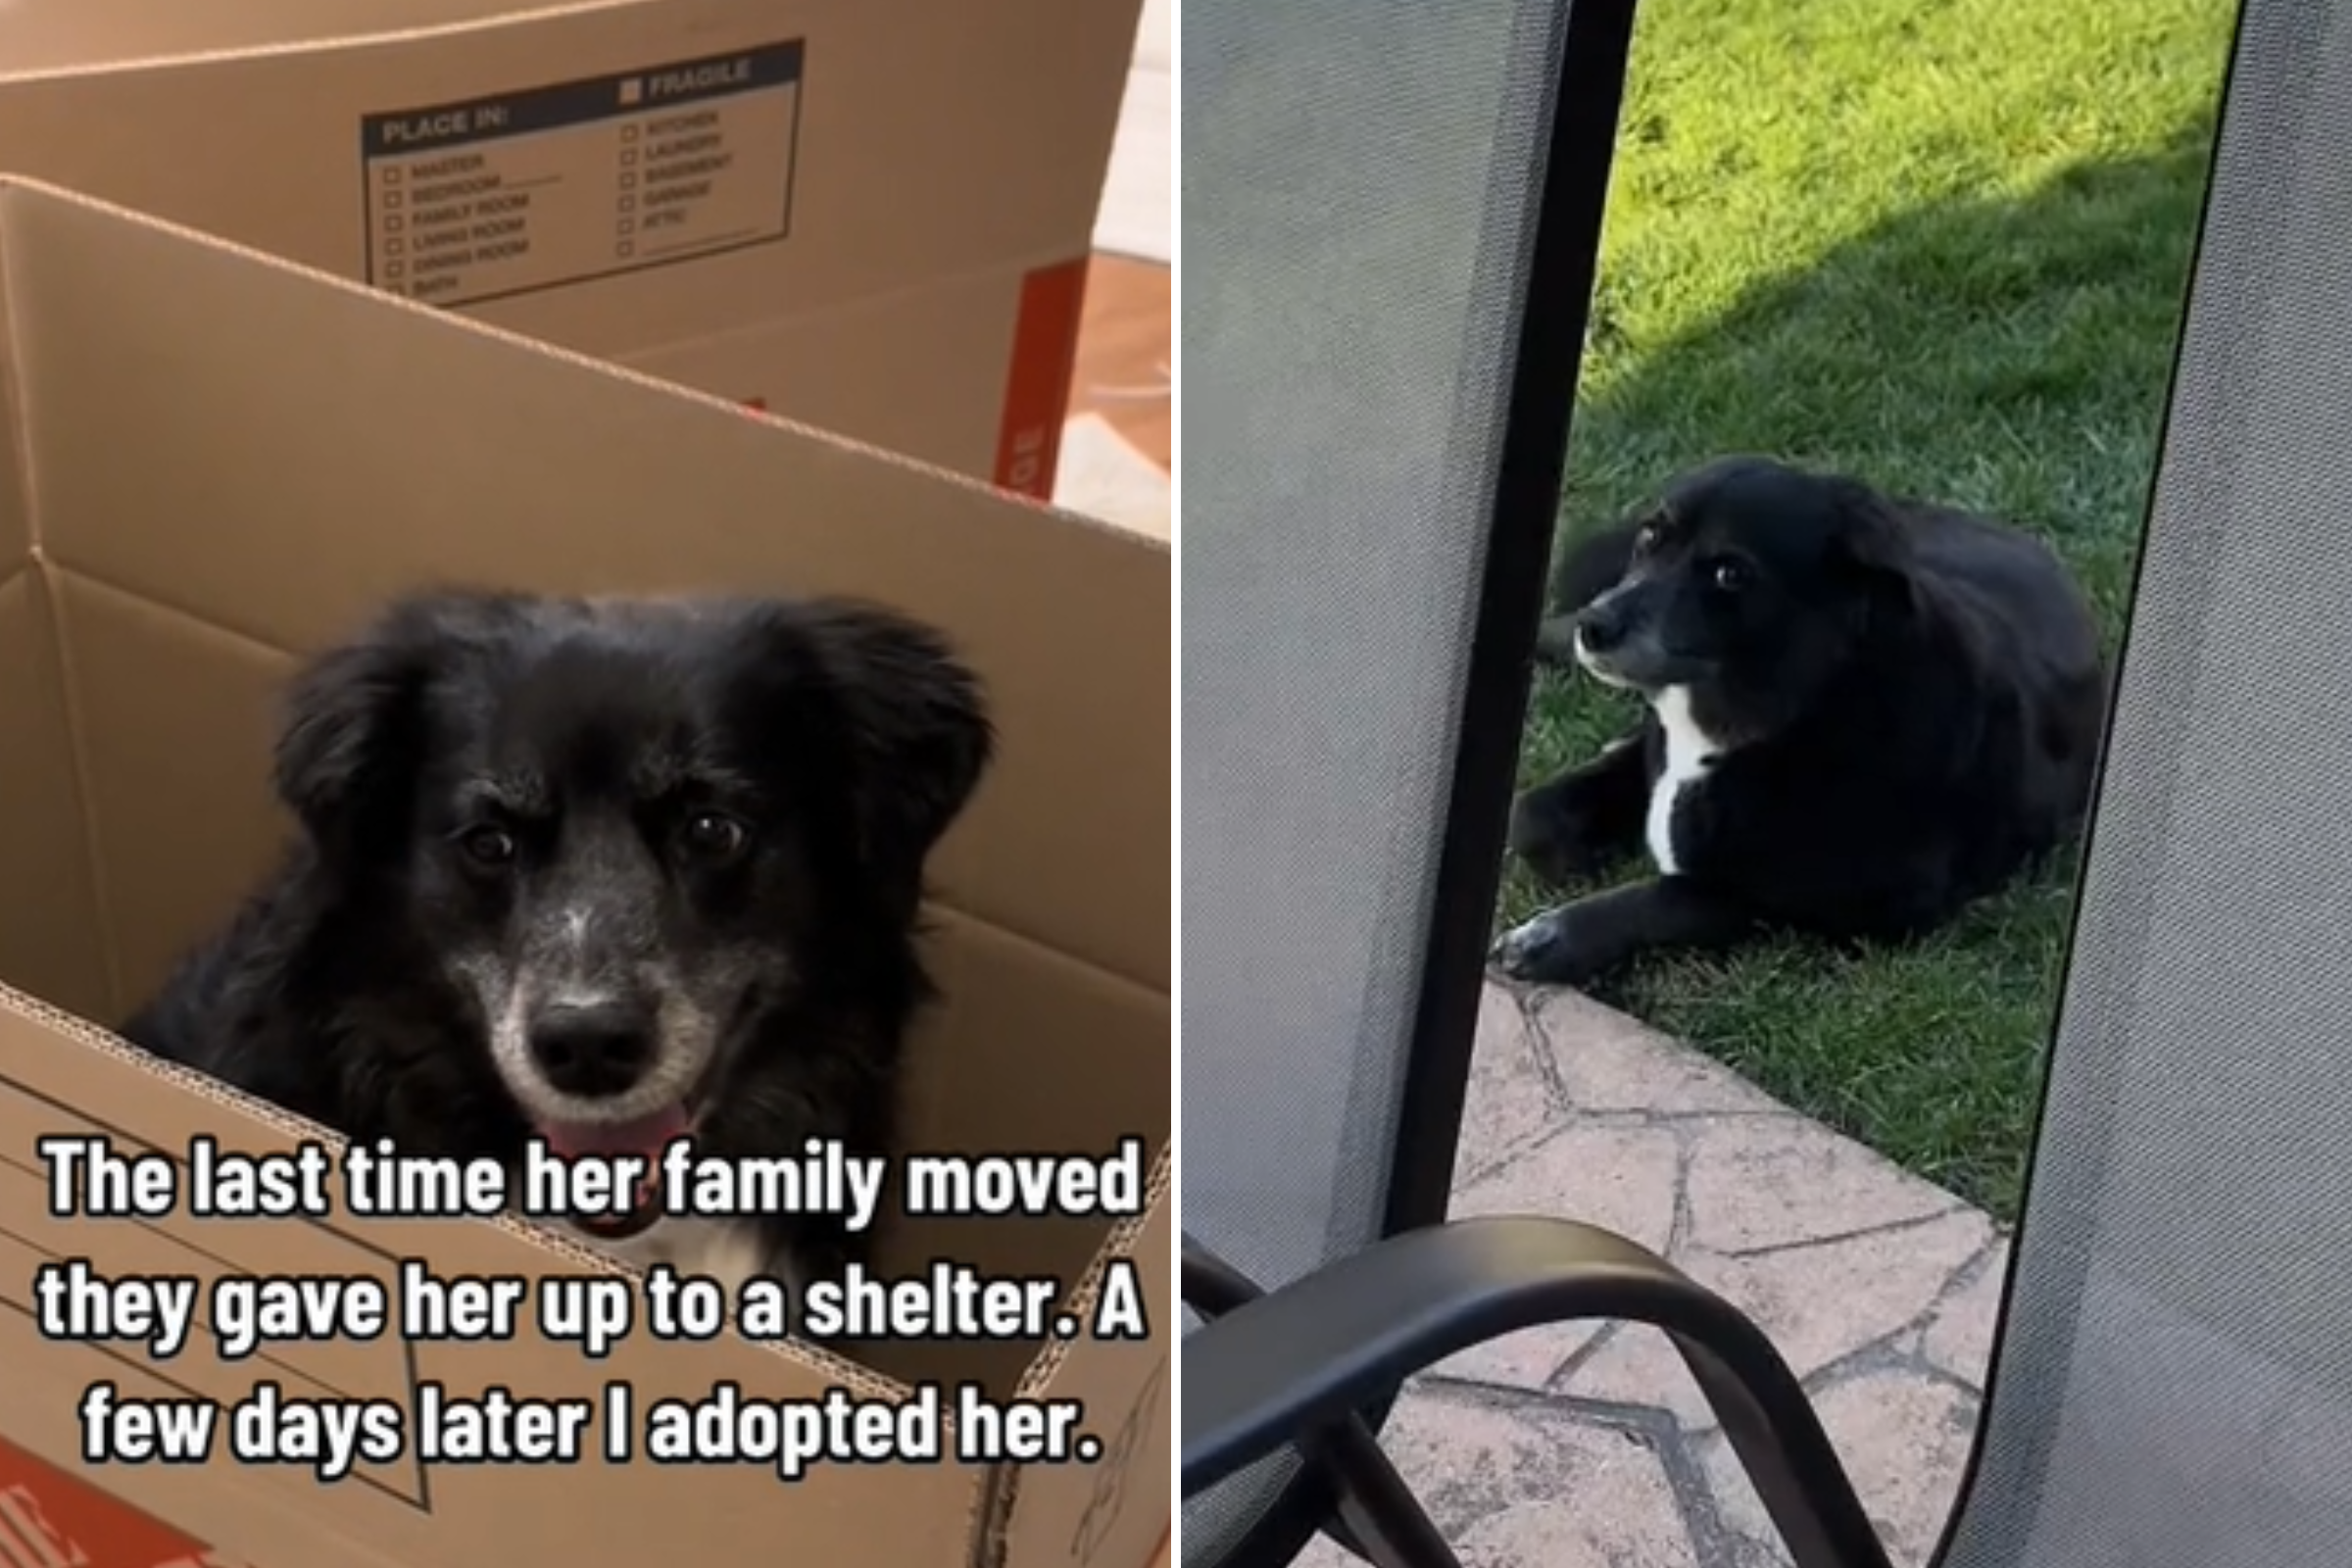 Rescue dog that was abandoned has saddest reaction to new owners packing